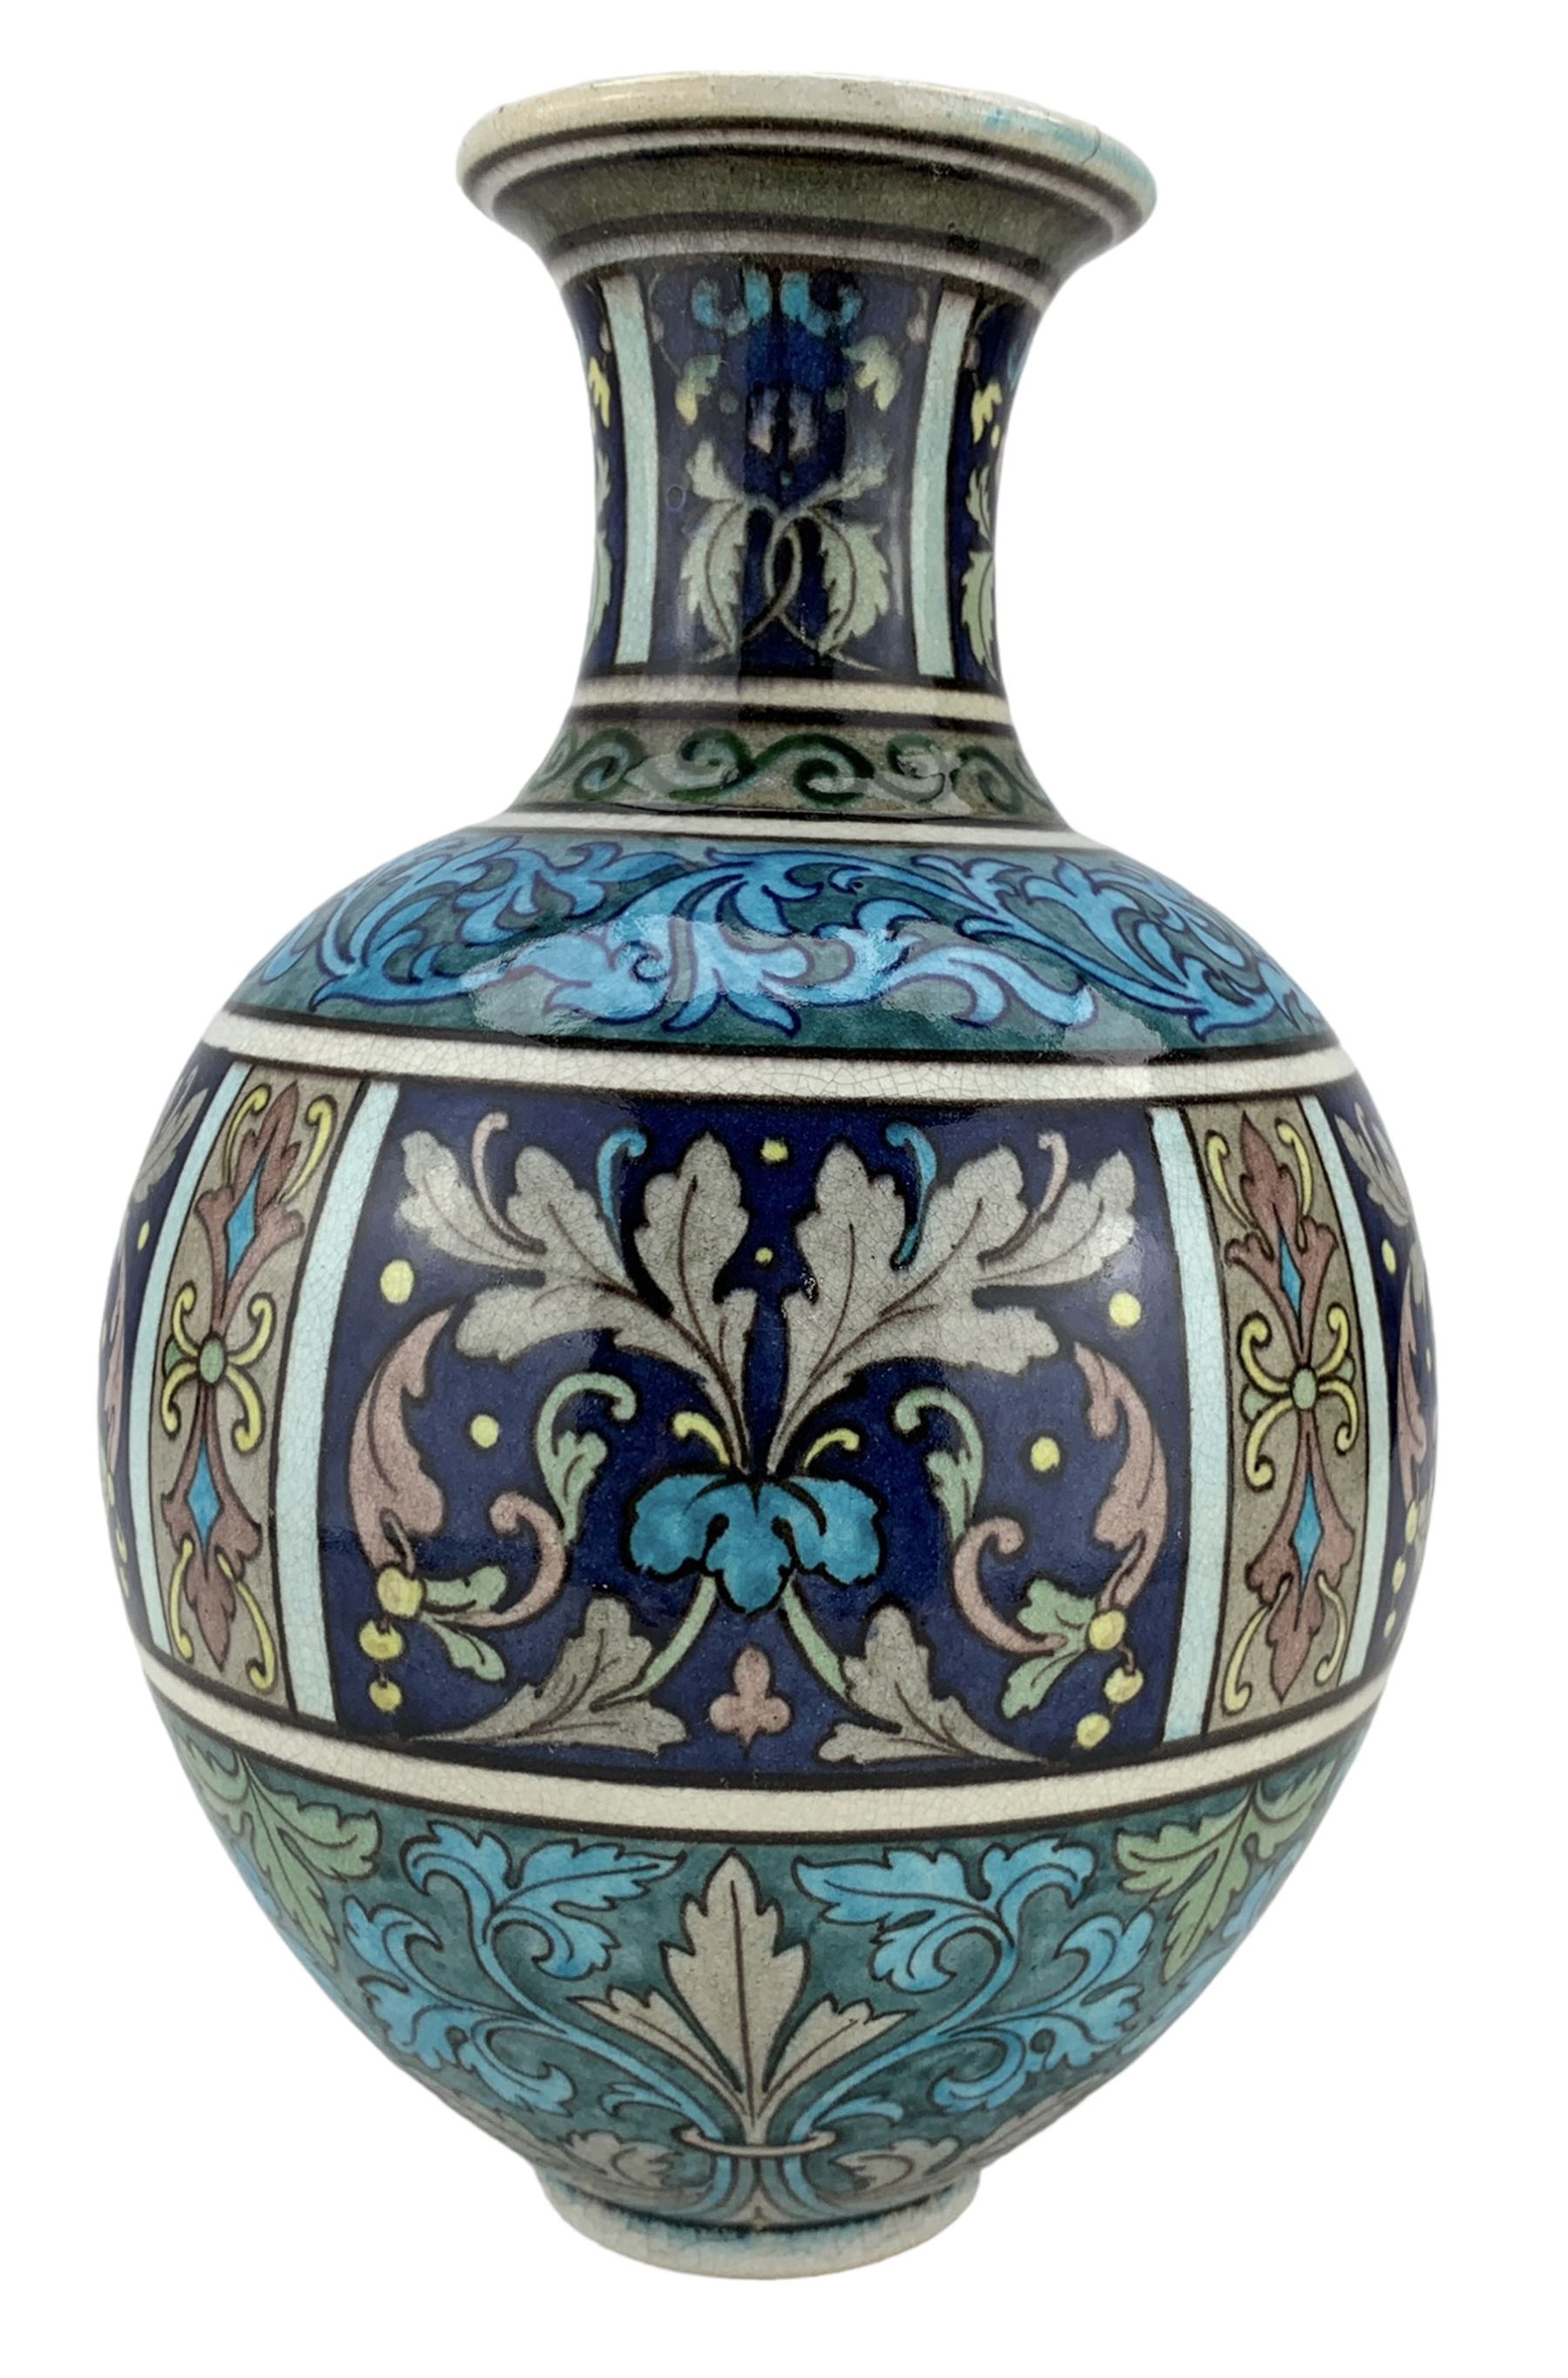 Burmantofts Faience Anglo-Persian vase - Image 4 of 6